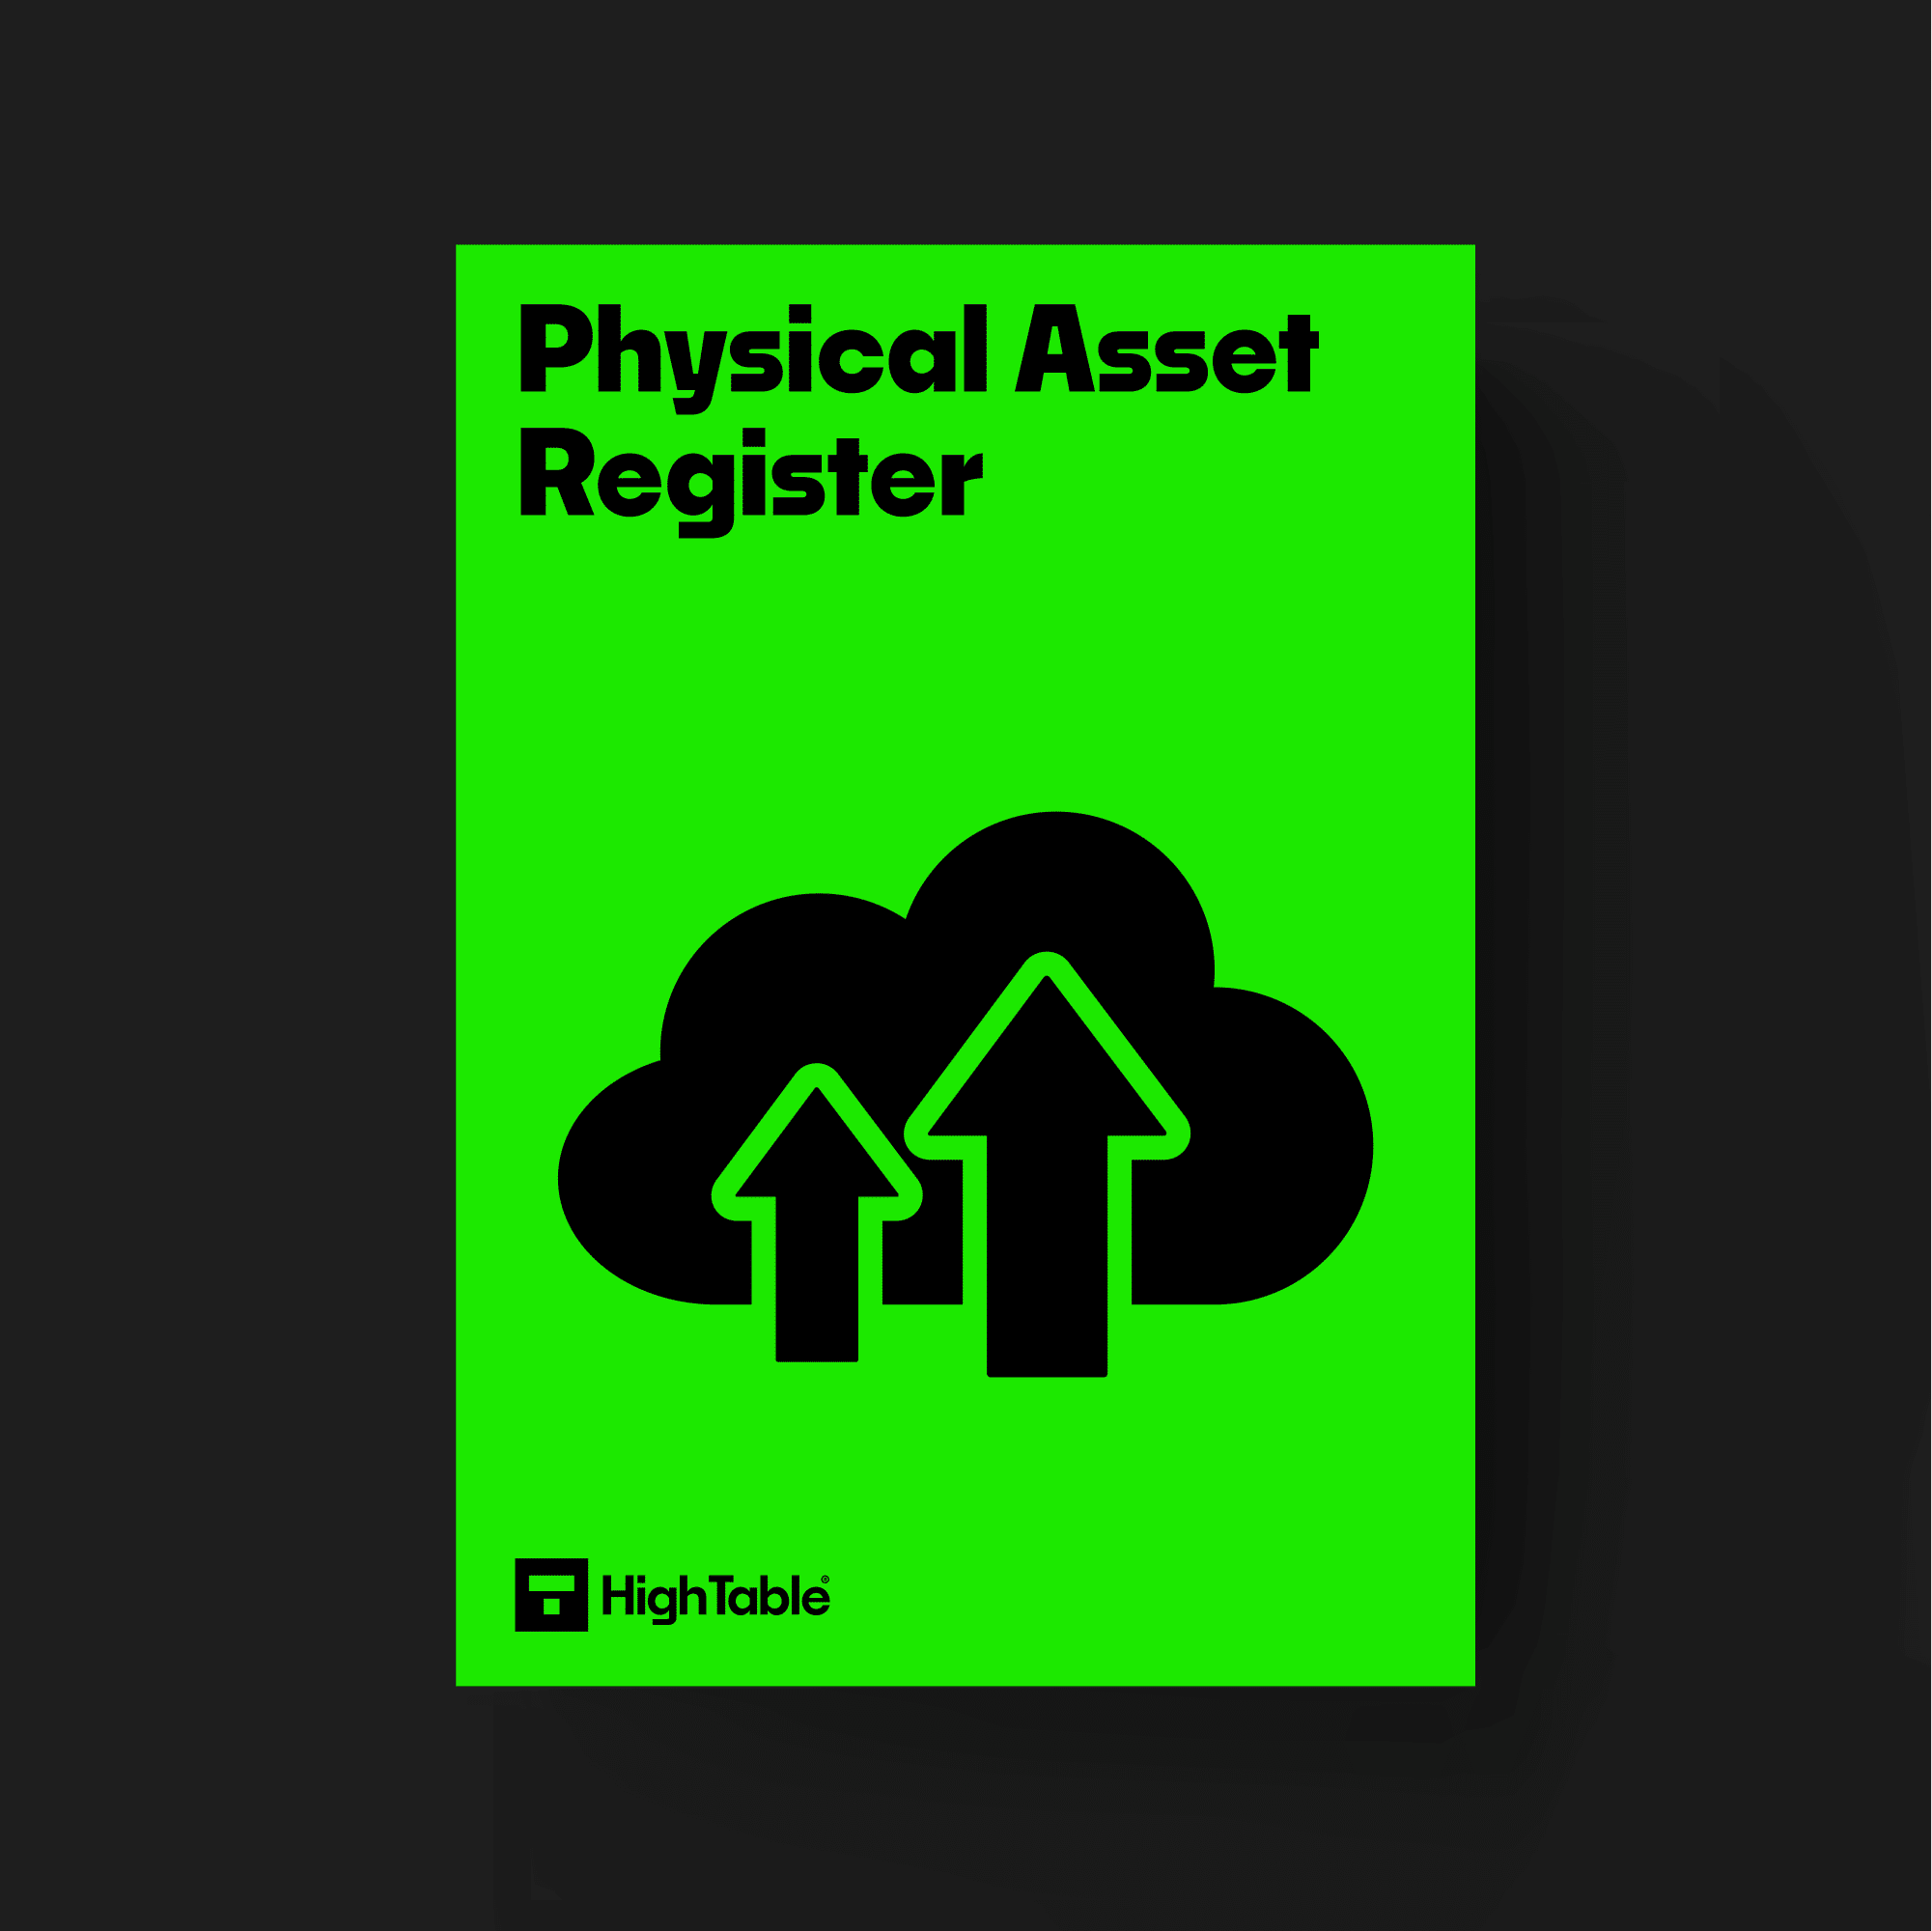 ISO27001 Physical Asset Register Template